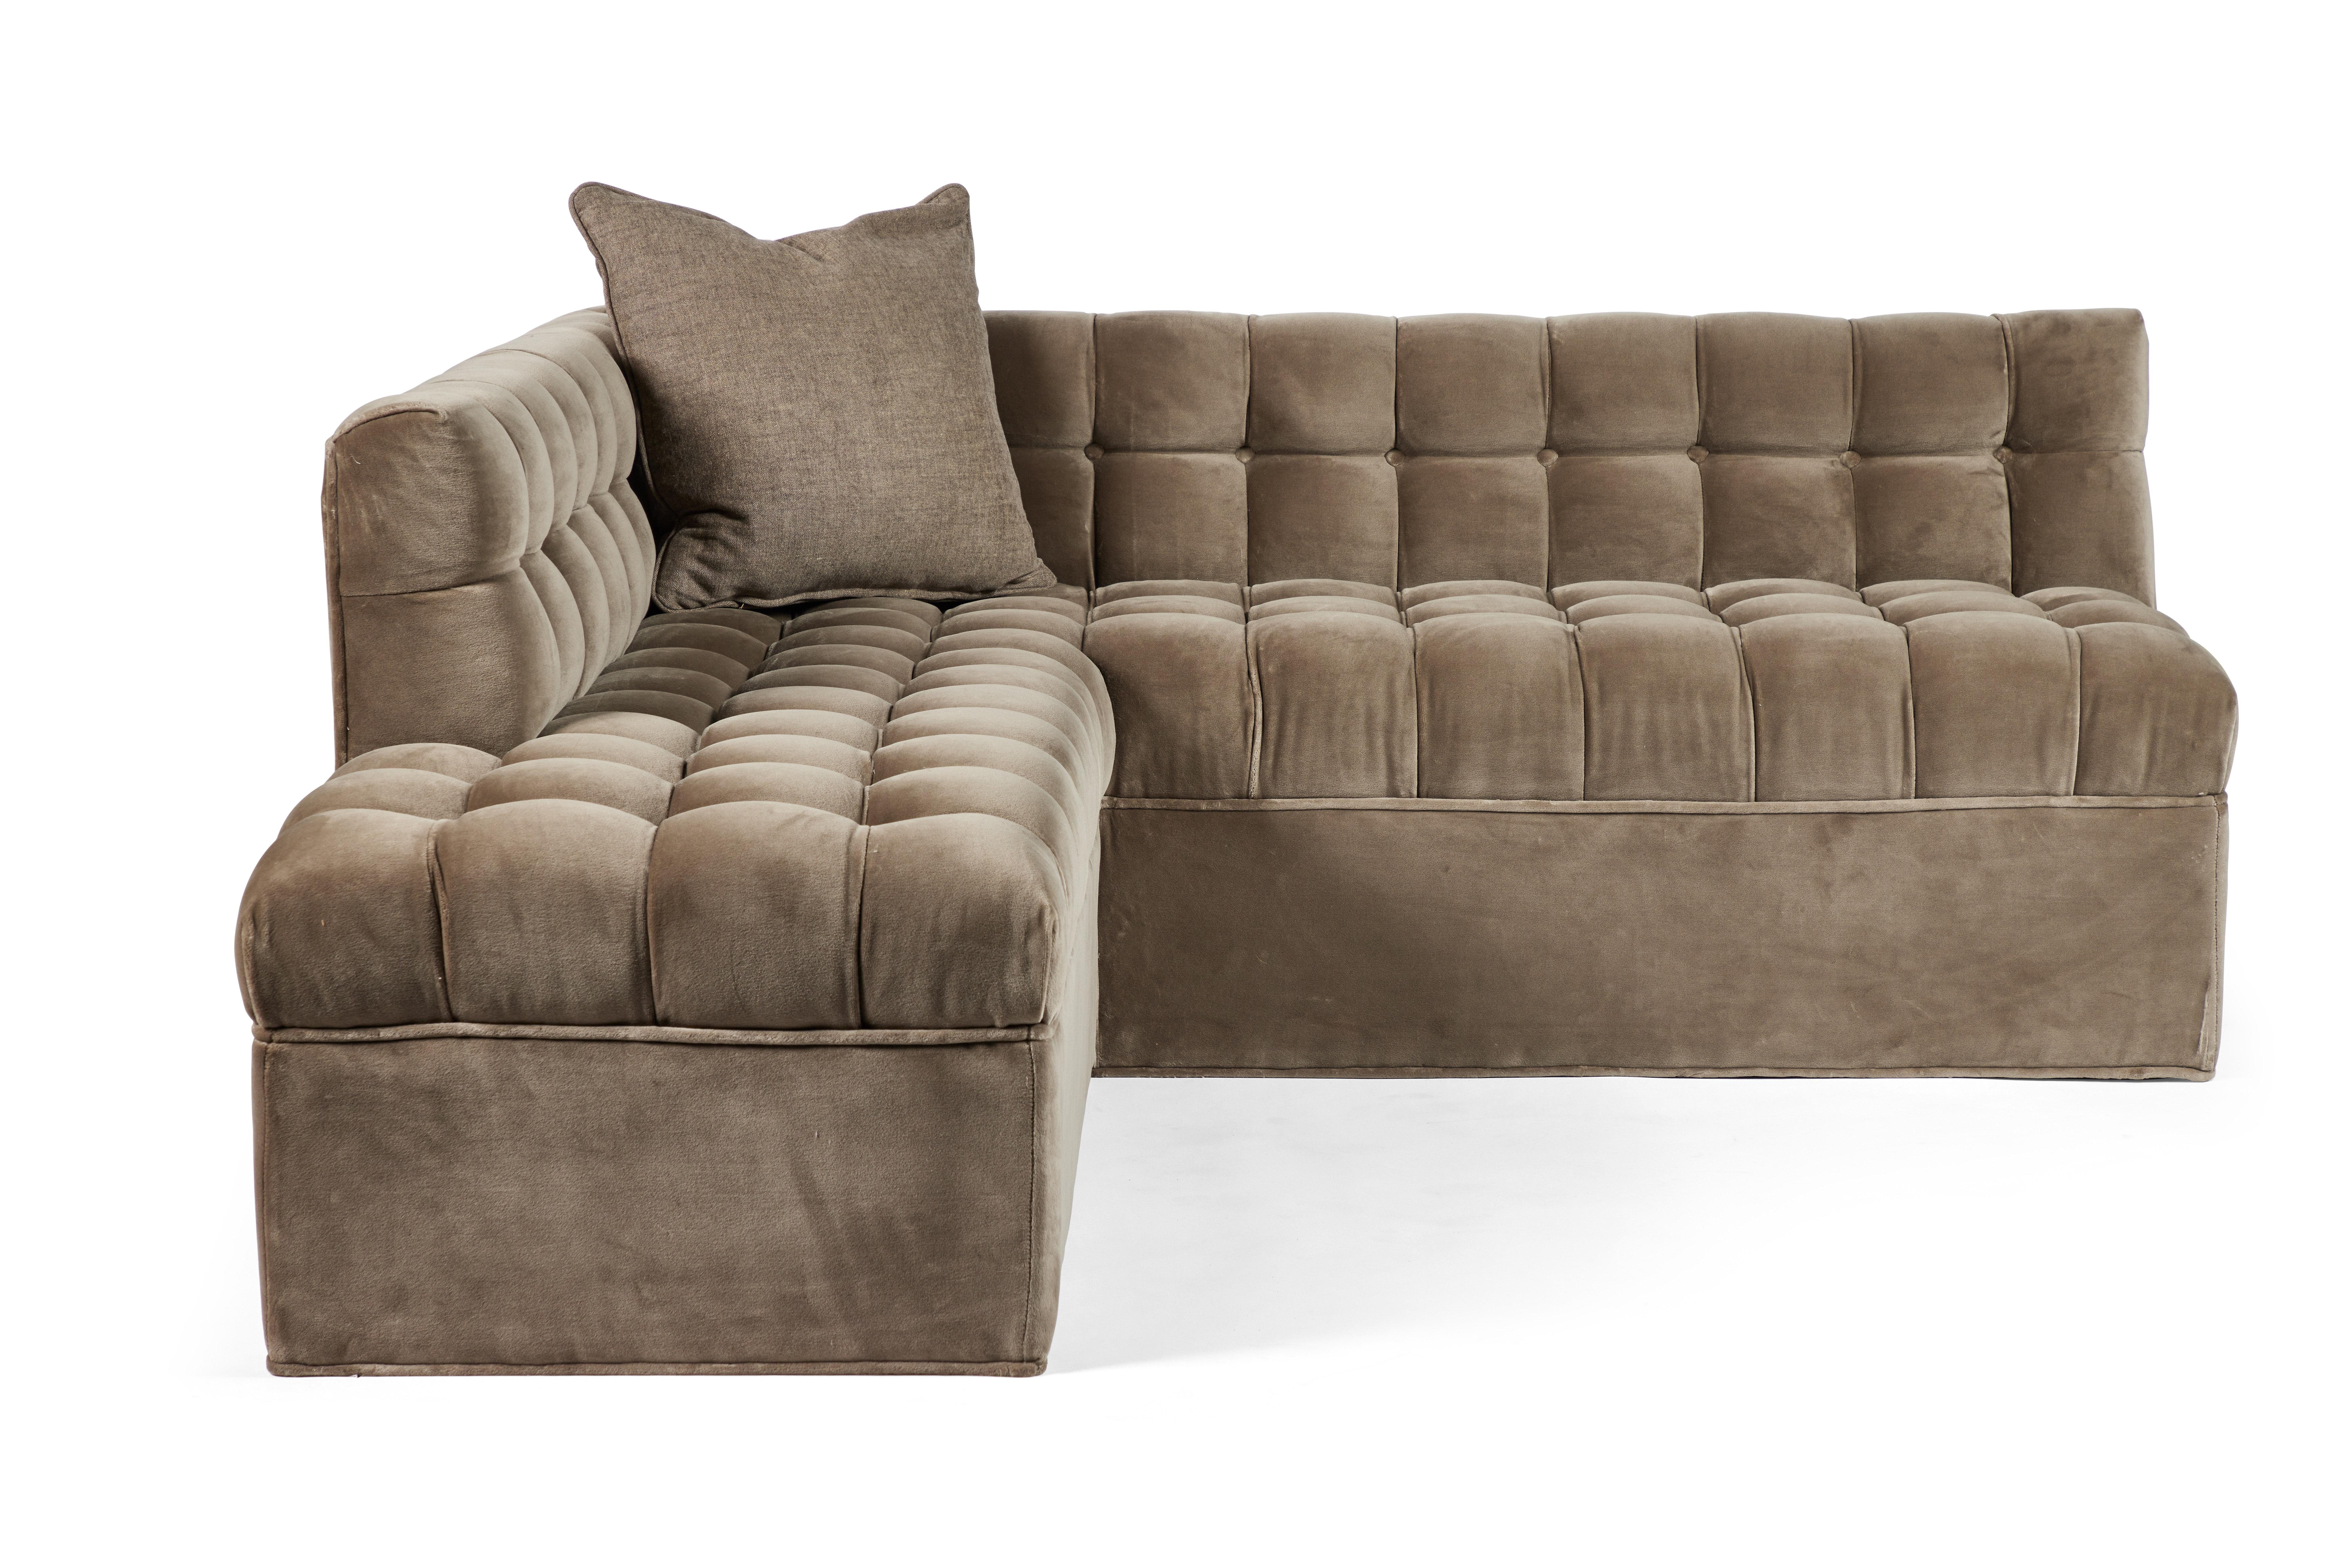 A set of 2 contemporary grey suede biscuit-tufted L-shaped corner sofas with custom matching pillows. 

Dimensions: 24